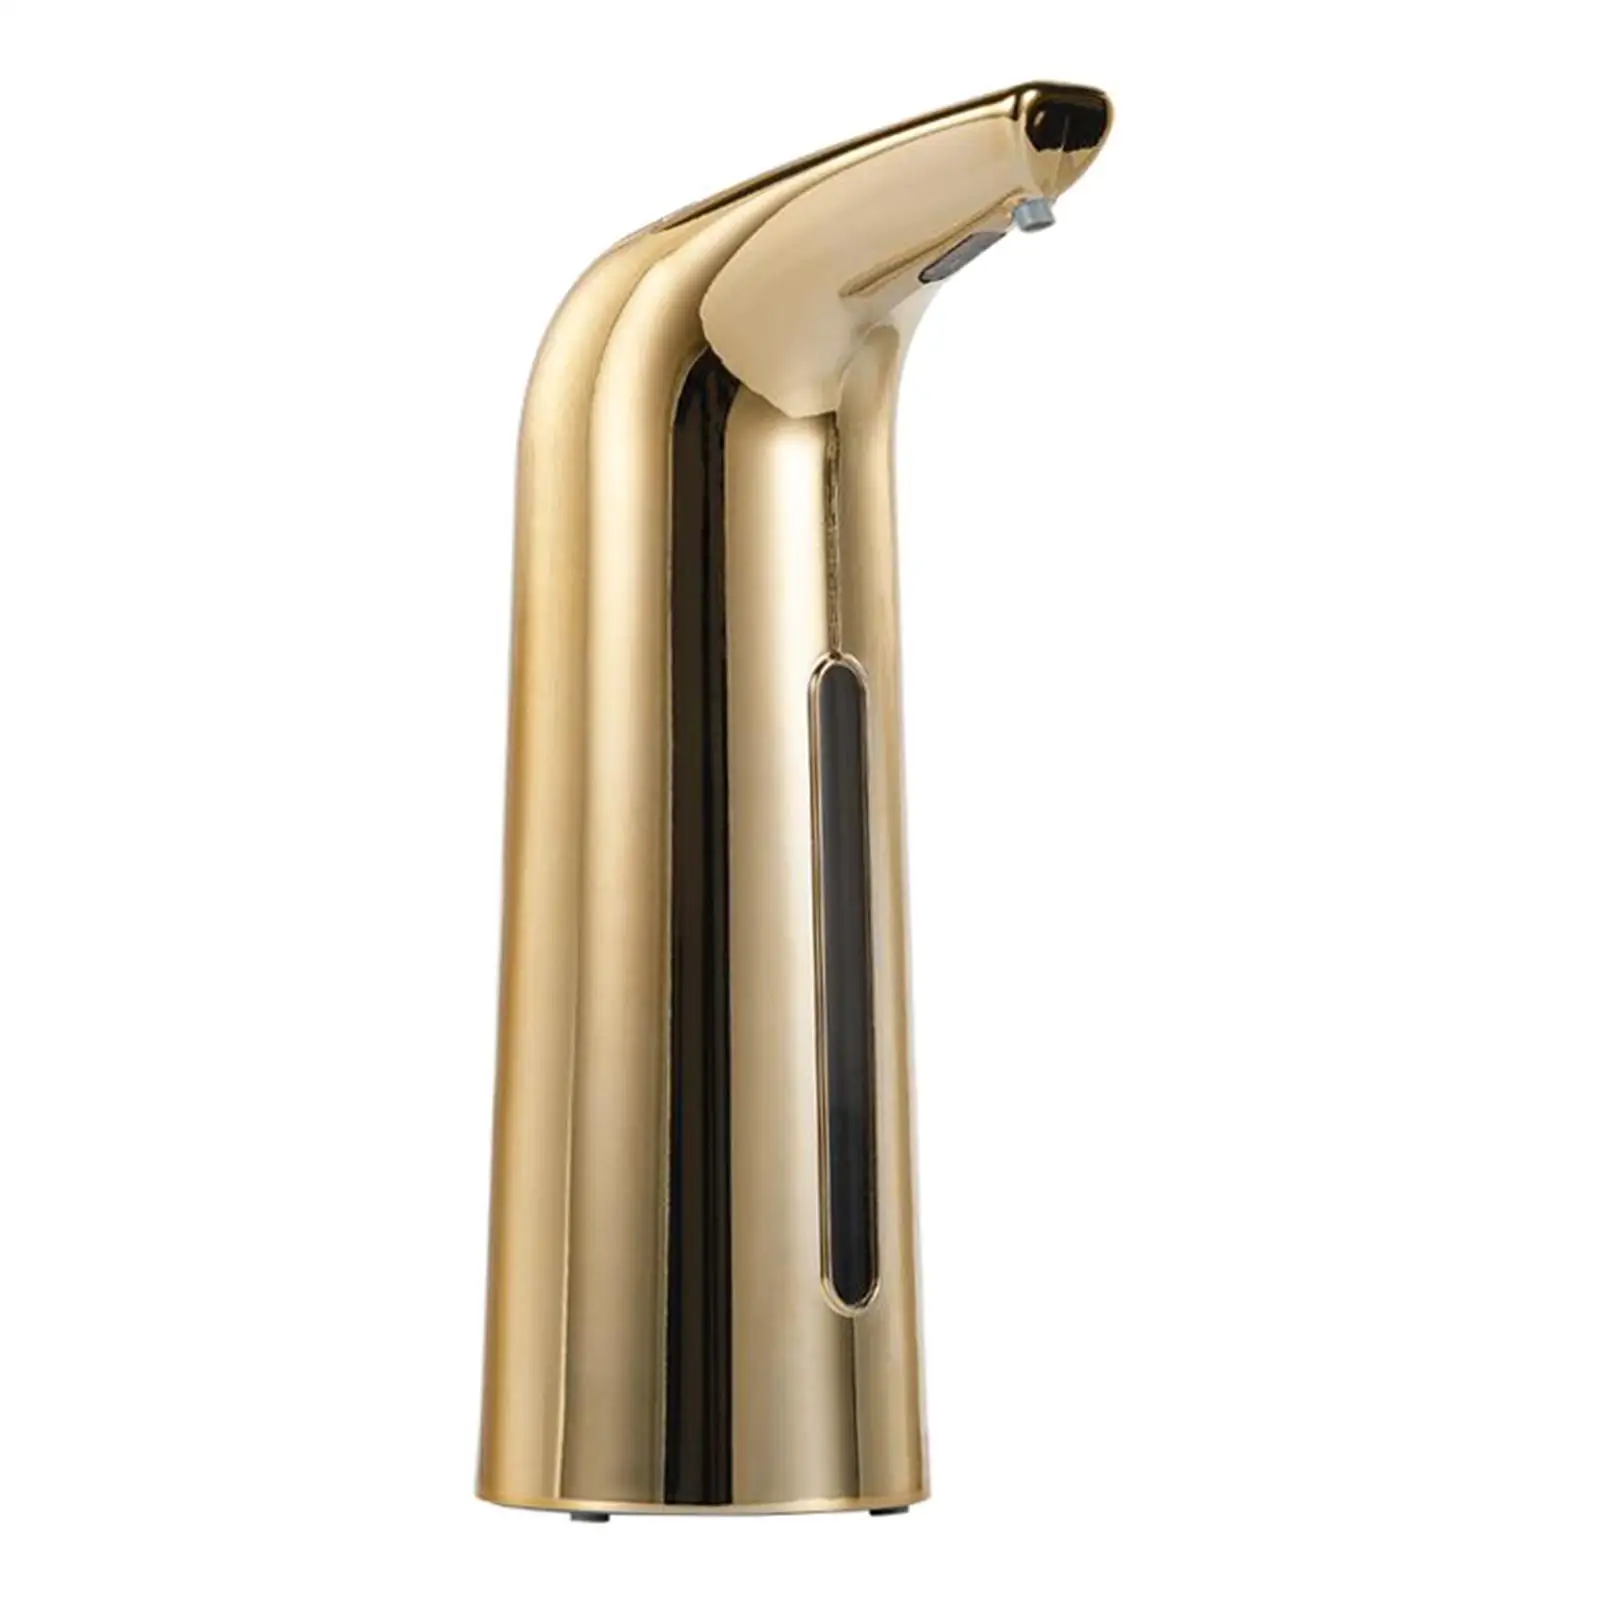 400ML Automatic Soap Dispenser  Touchless Sanitizer Bathroom Dispenser  Sensor Liquid Soap Dispenser for Kitchen